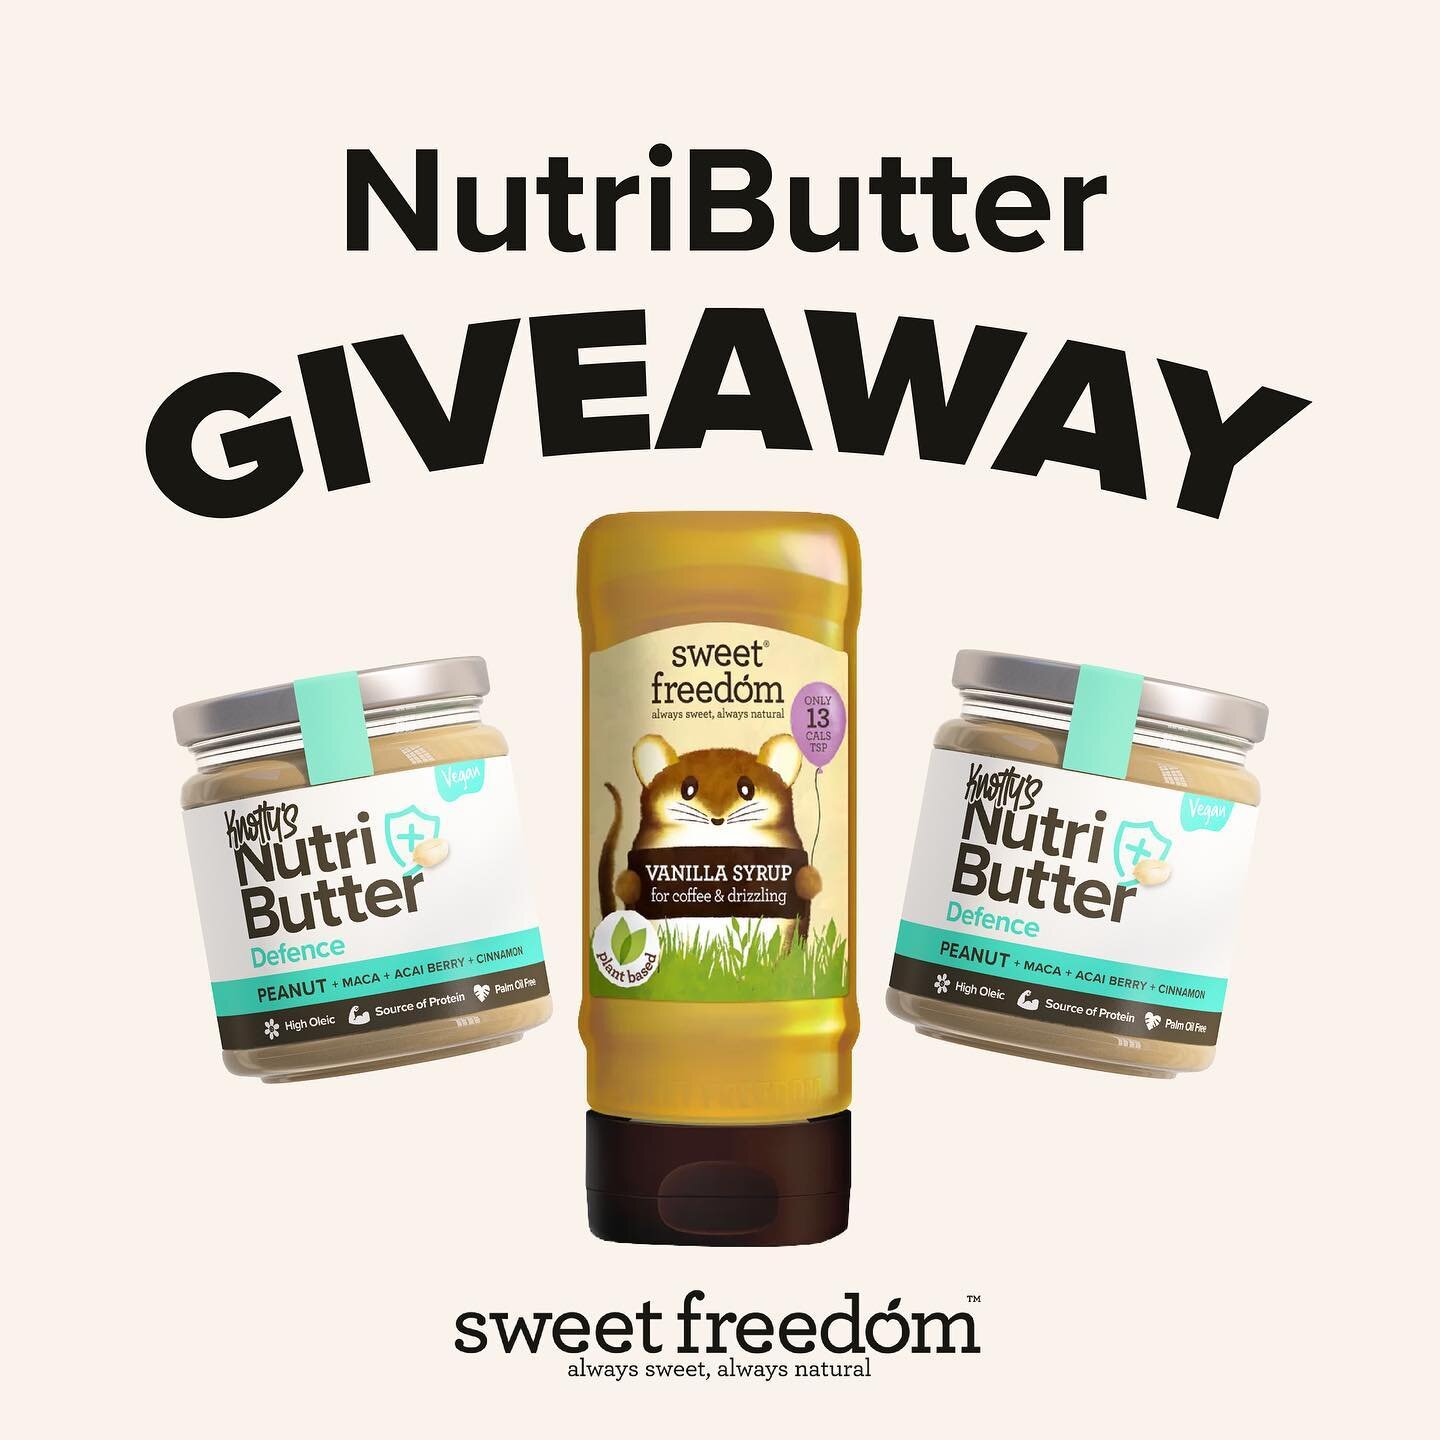 💚 GIVEAWAY CLOSED! 💚

We&rsquo;ve teamed up with our friends over at @sweetfreedomuk to giveaway this super tasty bundle!

What&rsquo;s inside:

🥜2x Nutri Butter Defence
🍫 1x Sweet Freedom Vanilla Syrup

How to enter:
- Like &amp; save this post
